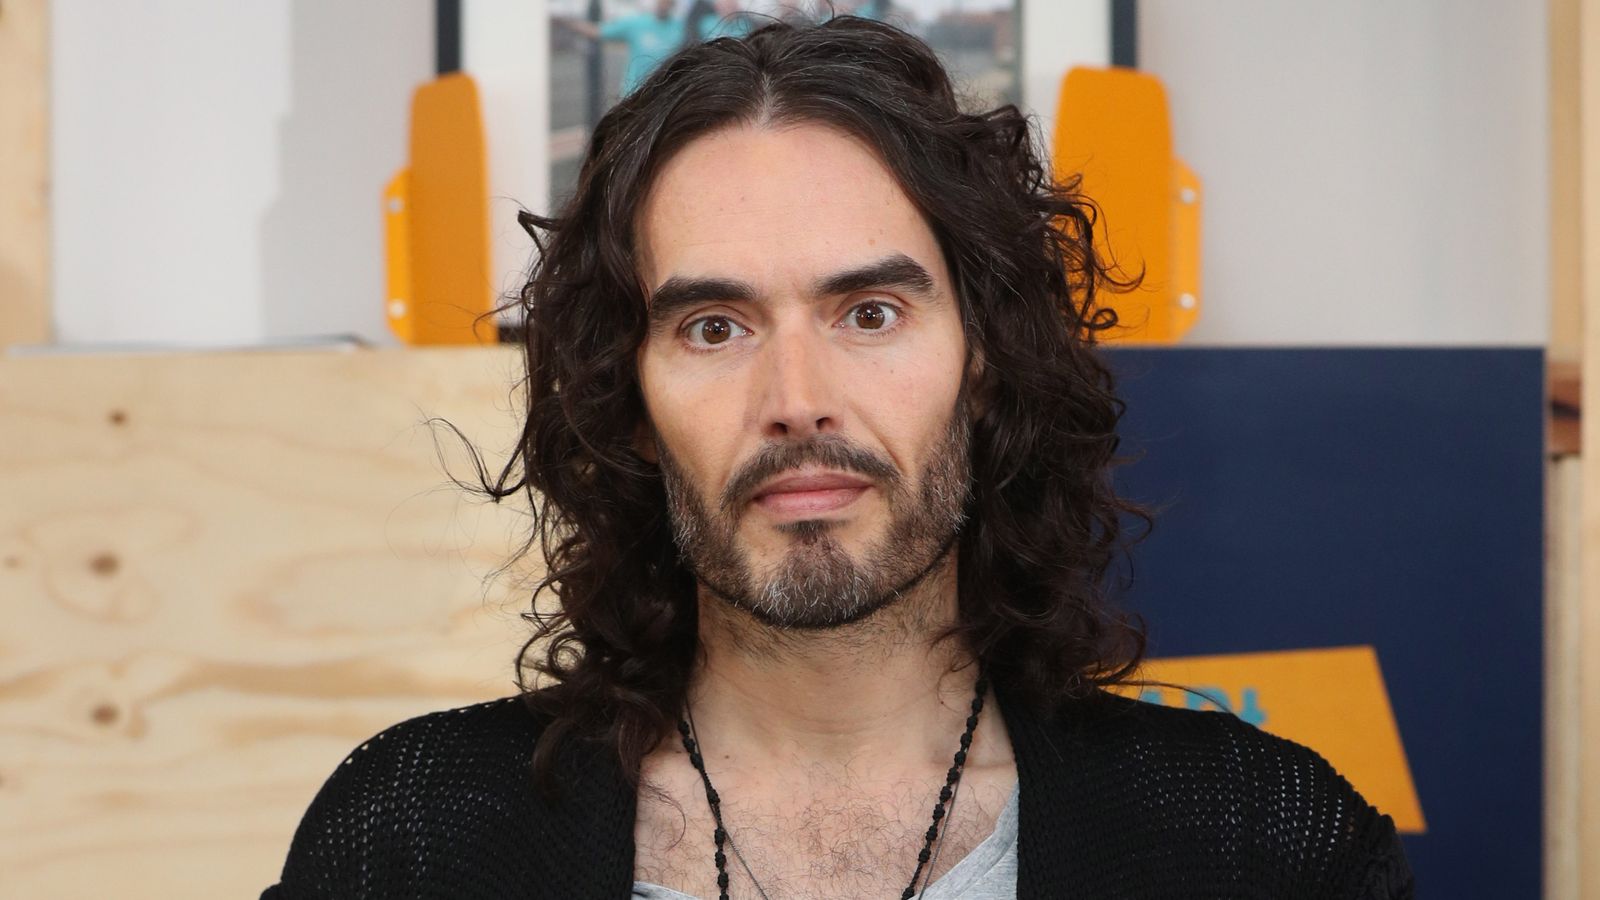 Russell Brand reportedly interviewed by Met Police over sex offence allegations